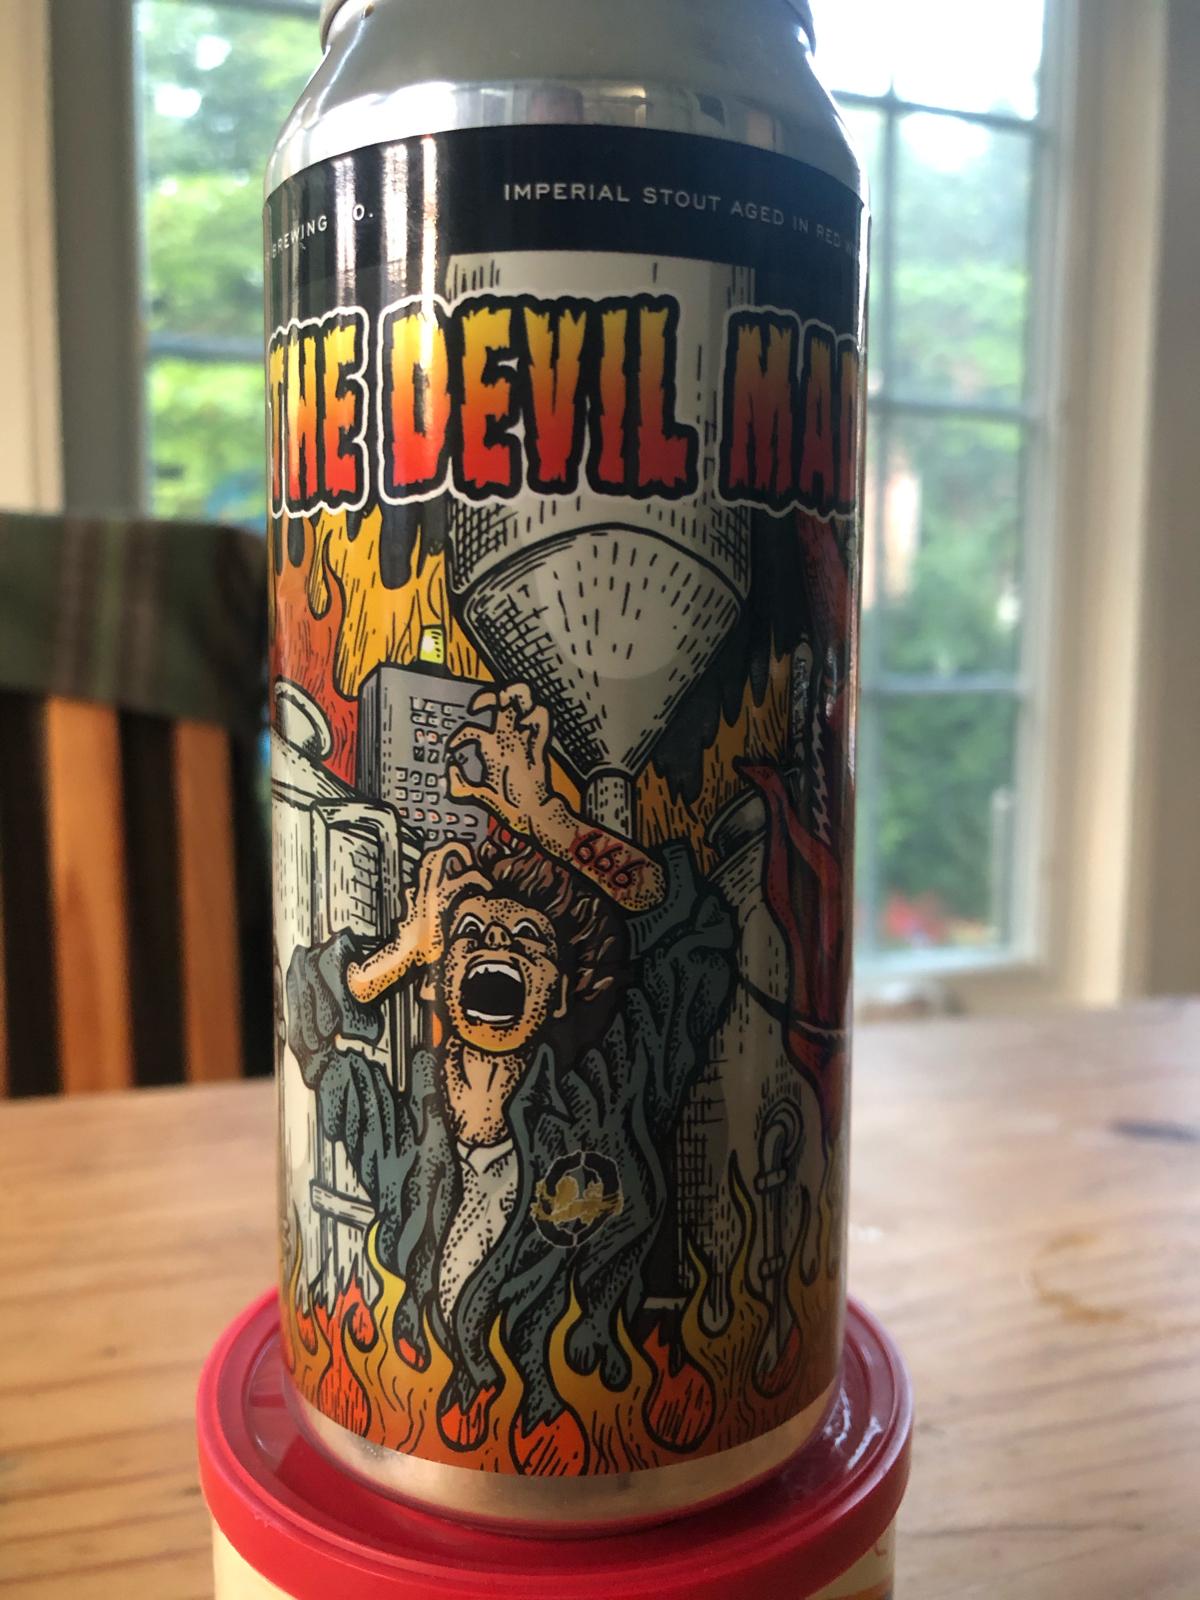 The Devil Made Me Do It! (Red Wine Barrel Aged)